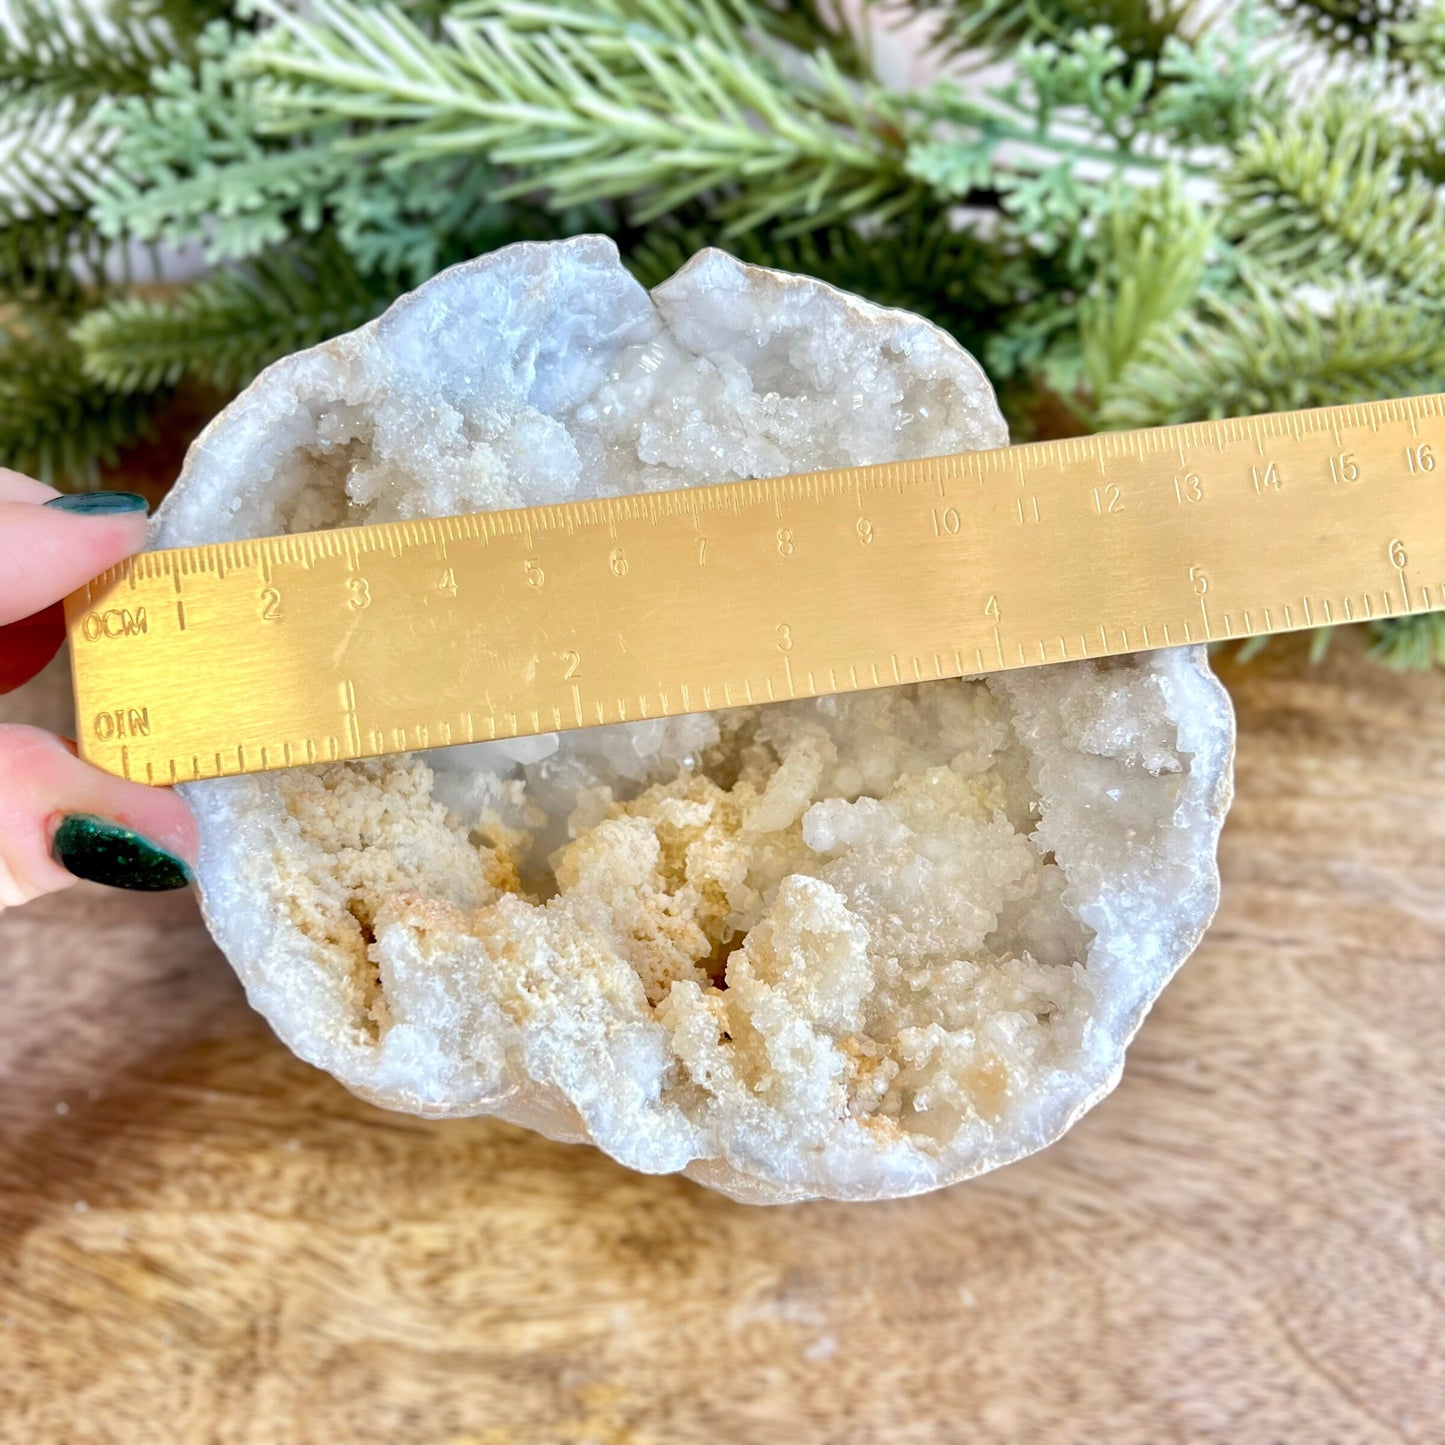 Image of a large Quartz sugar geode from Morocco. Has a sandy beige exterior, and lots of small, white crystals on the inside. Has some pale yellow iron staining on some crystals